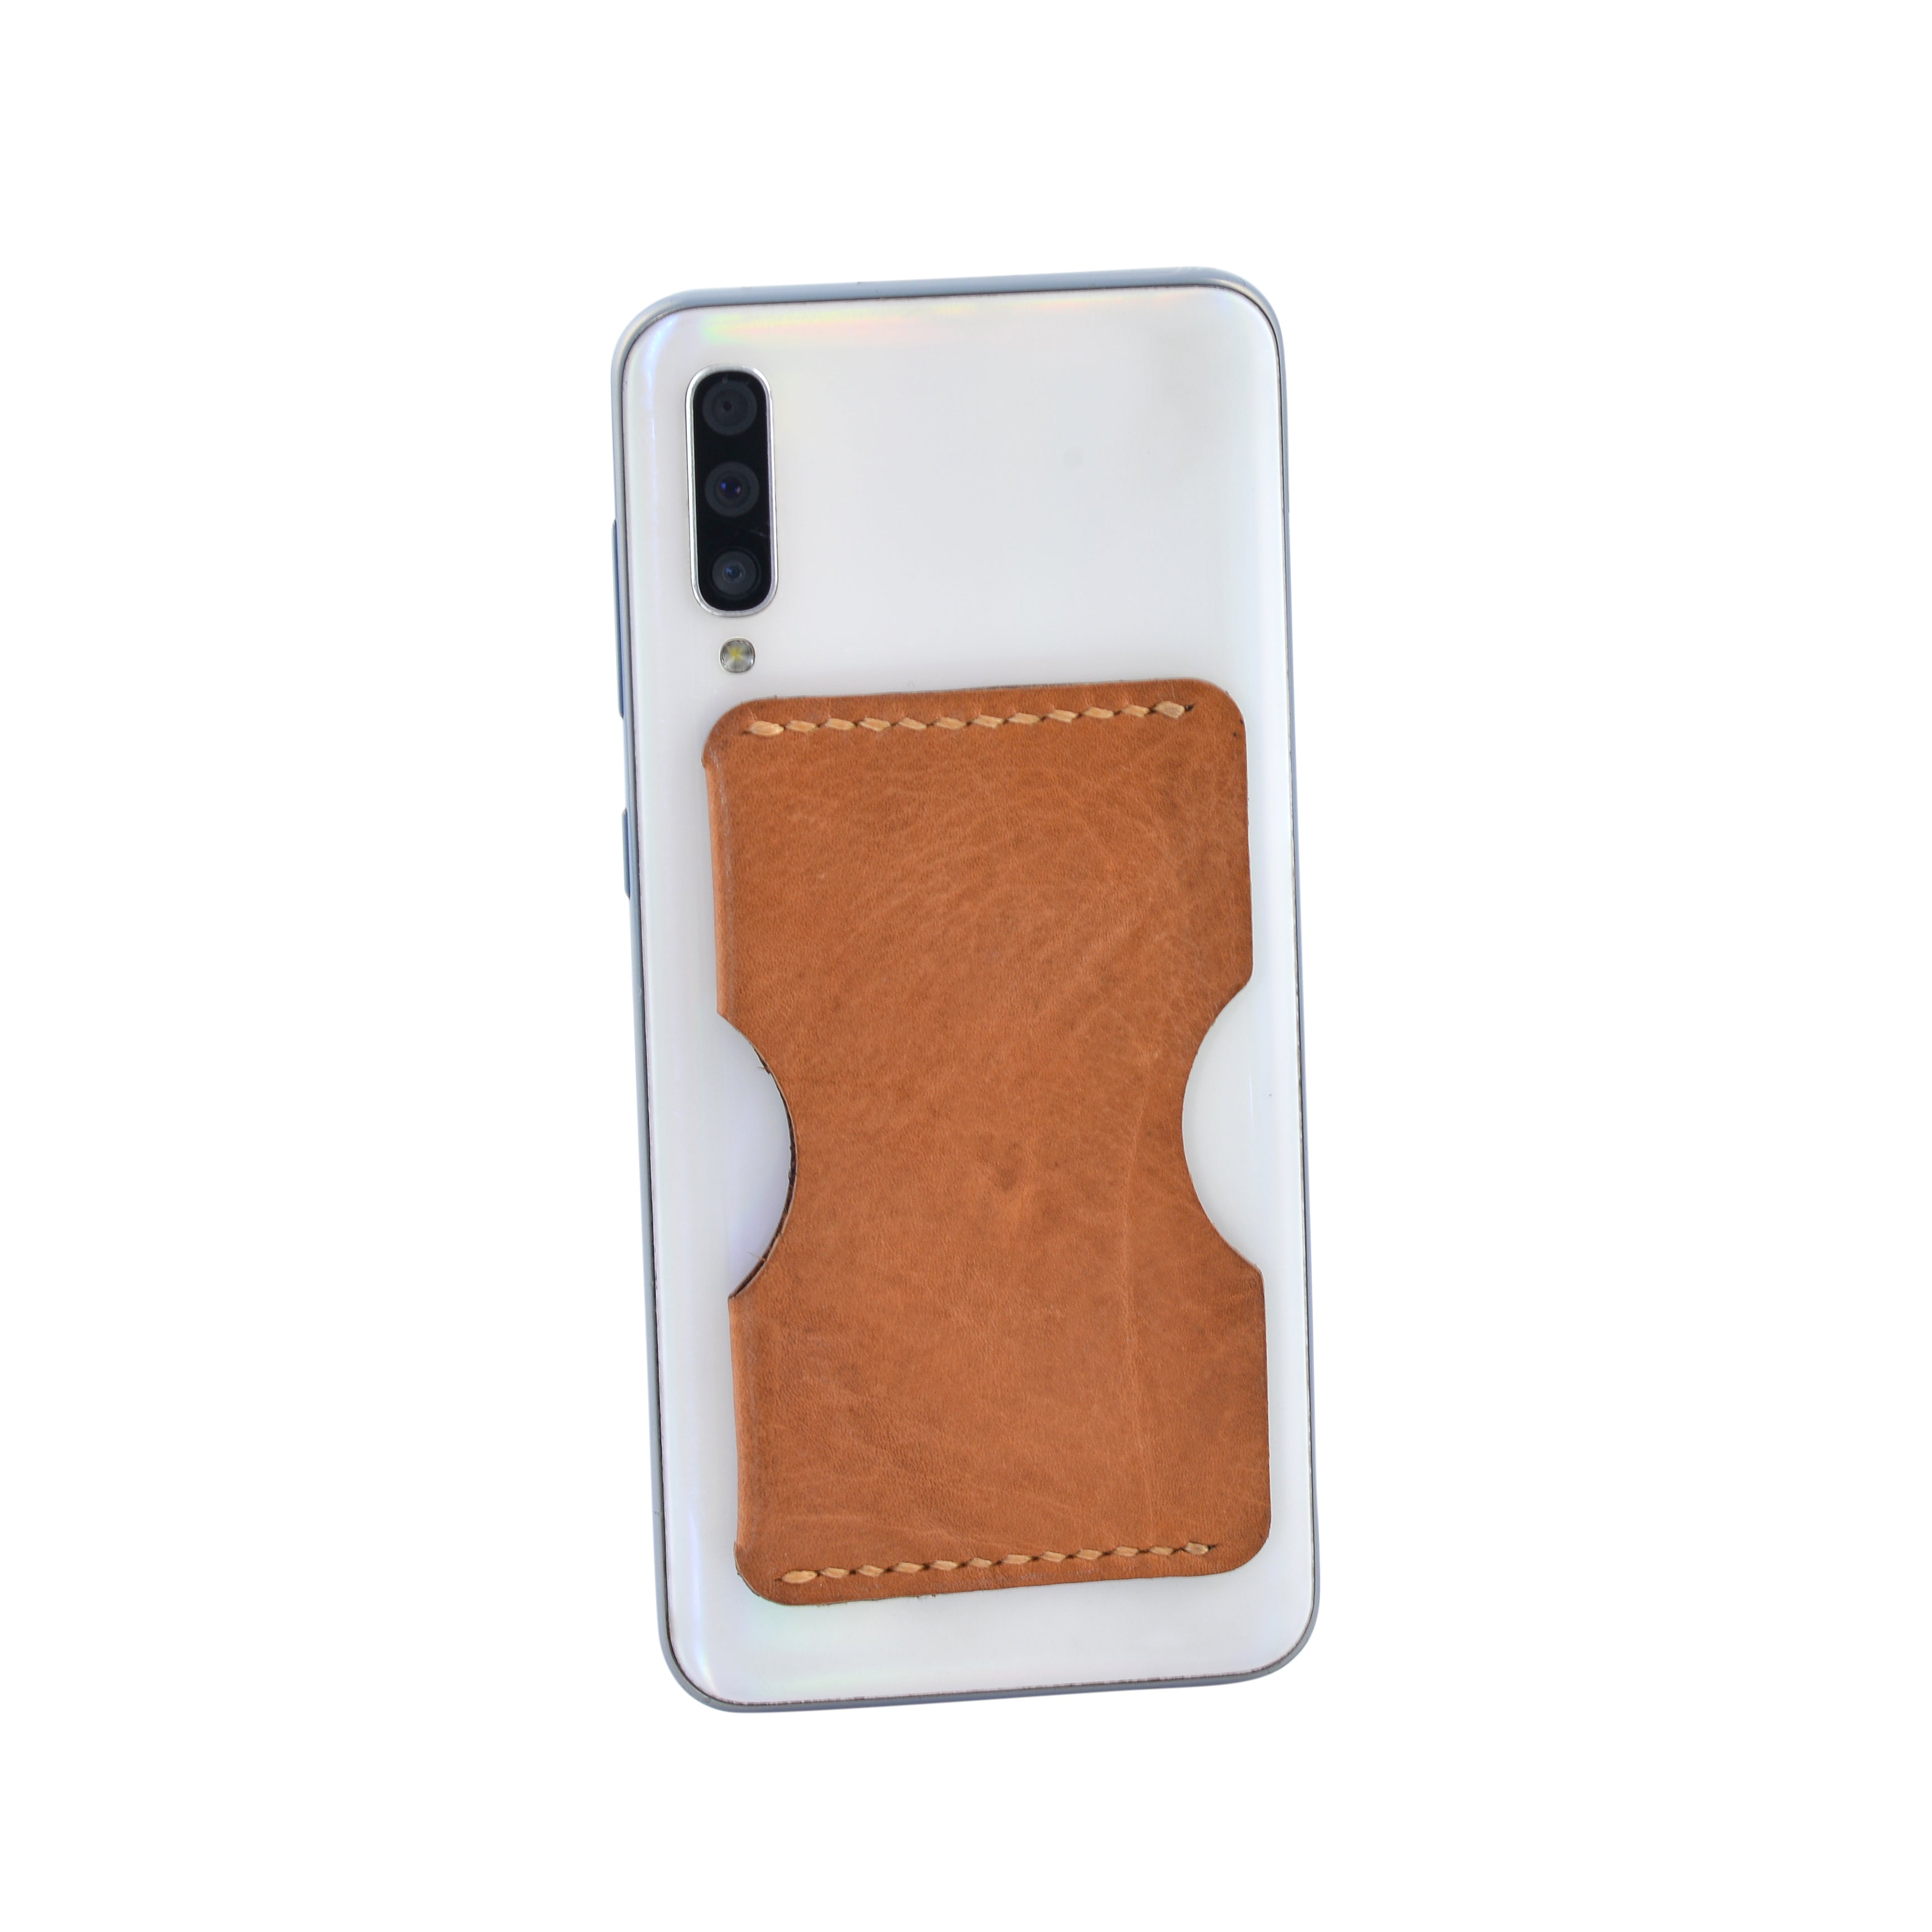 No.14 - Stick on Phone Wallet